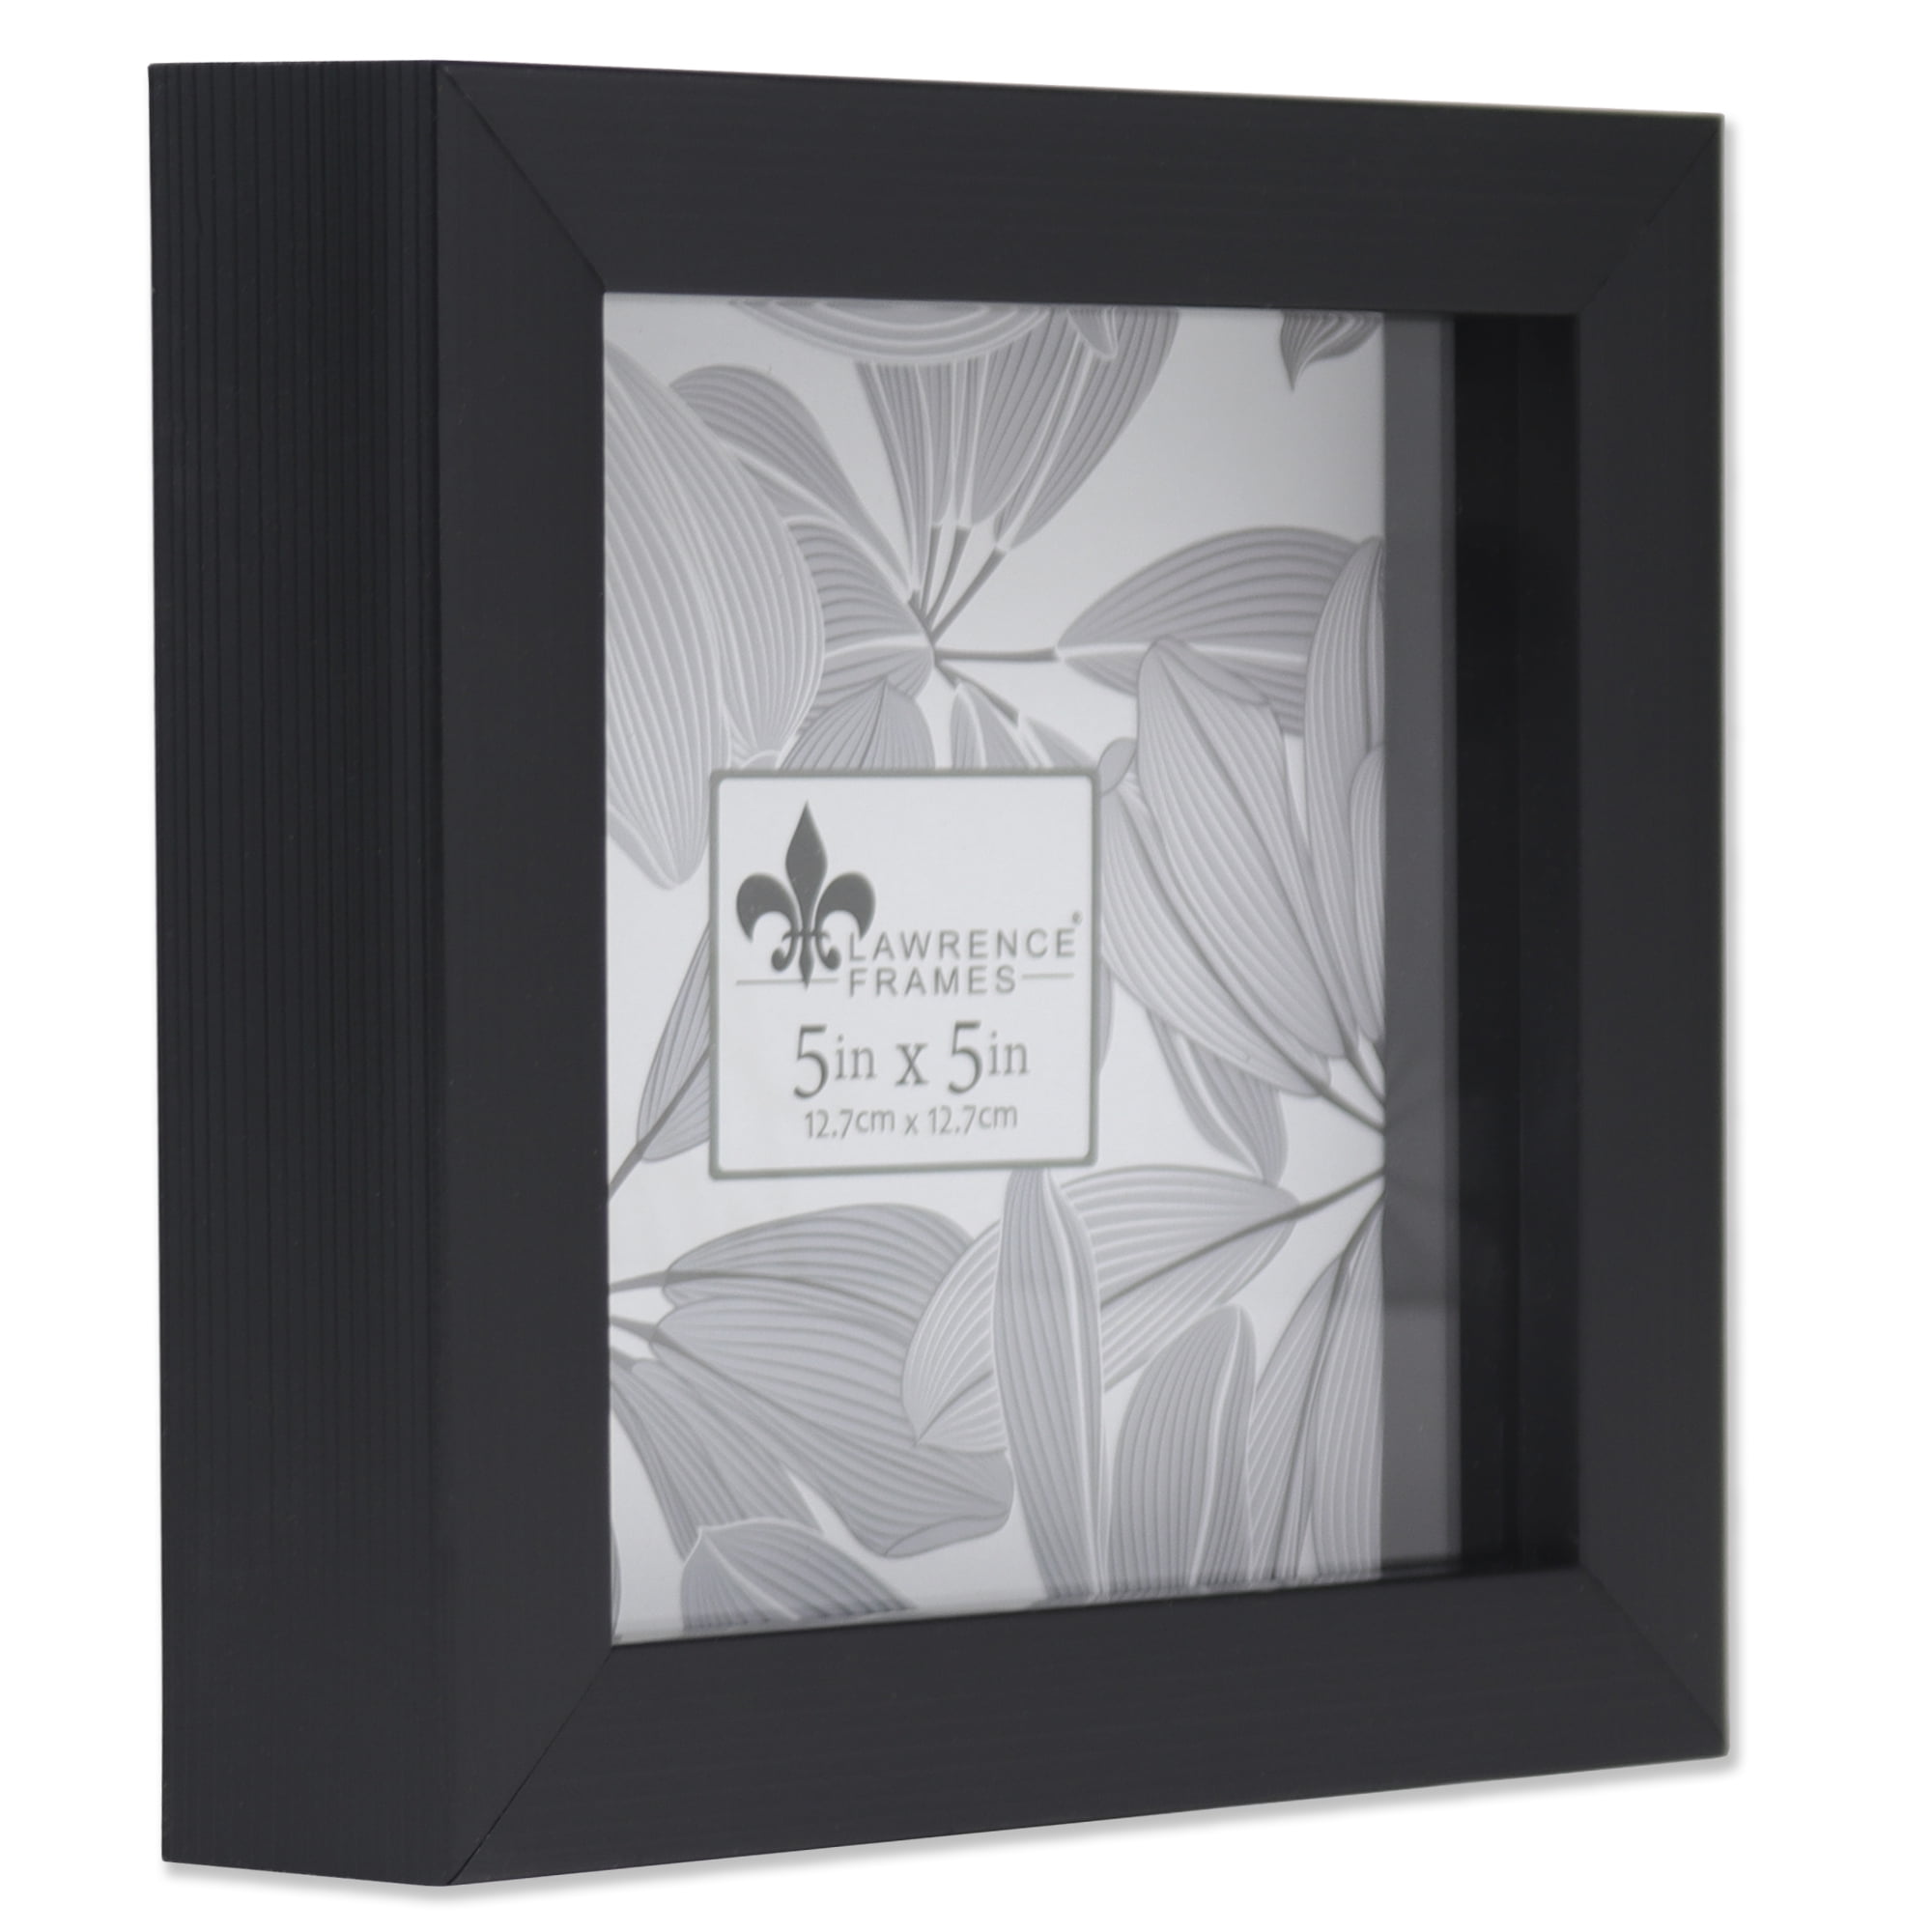 Lawrence Frames Lawrence Gallery Picture Frame Black 